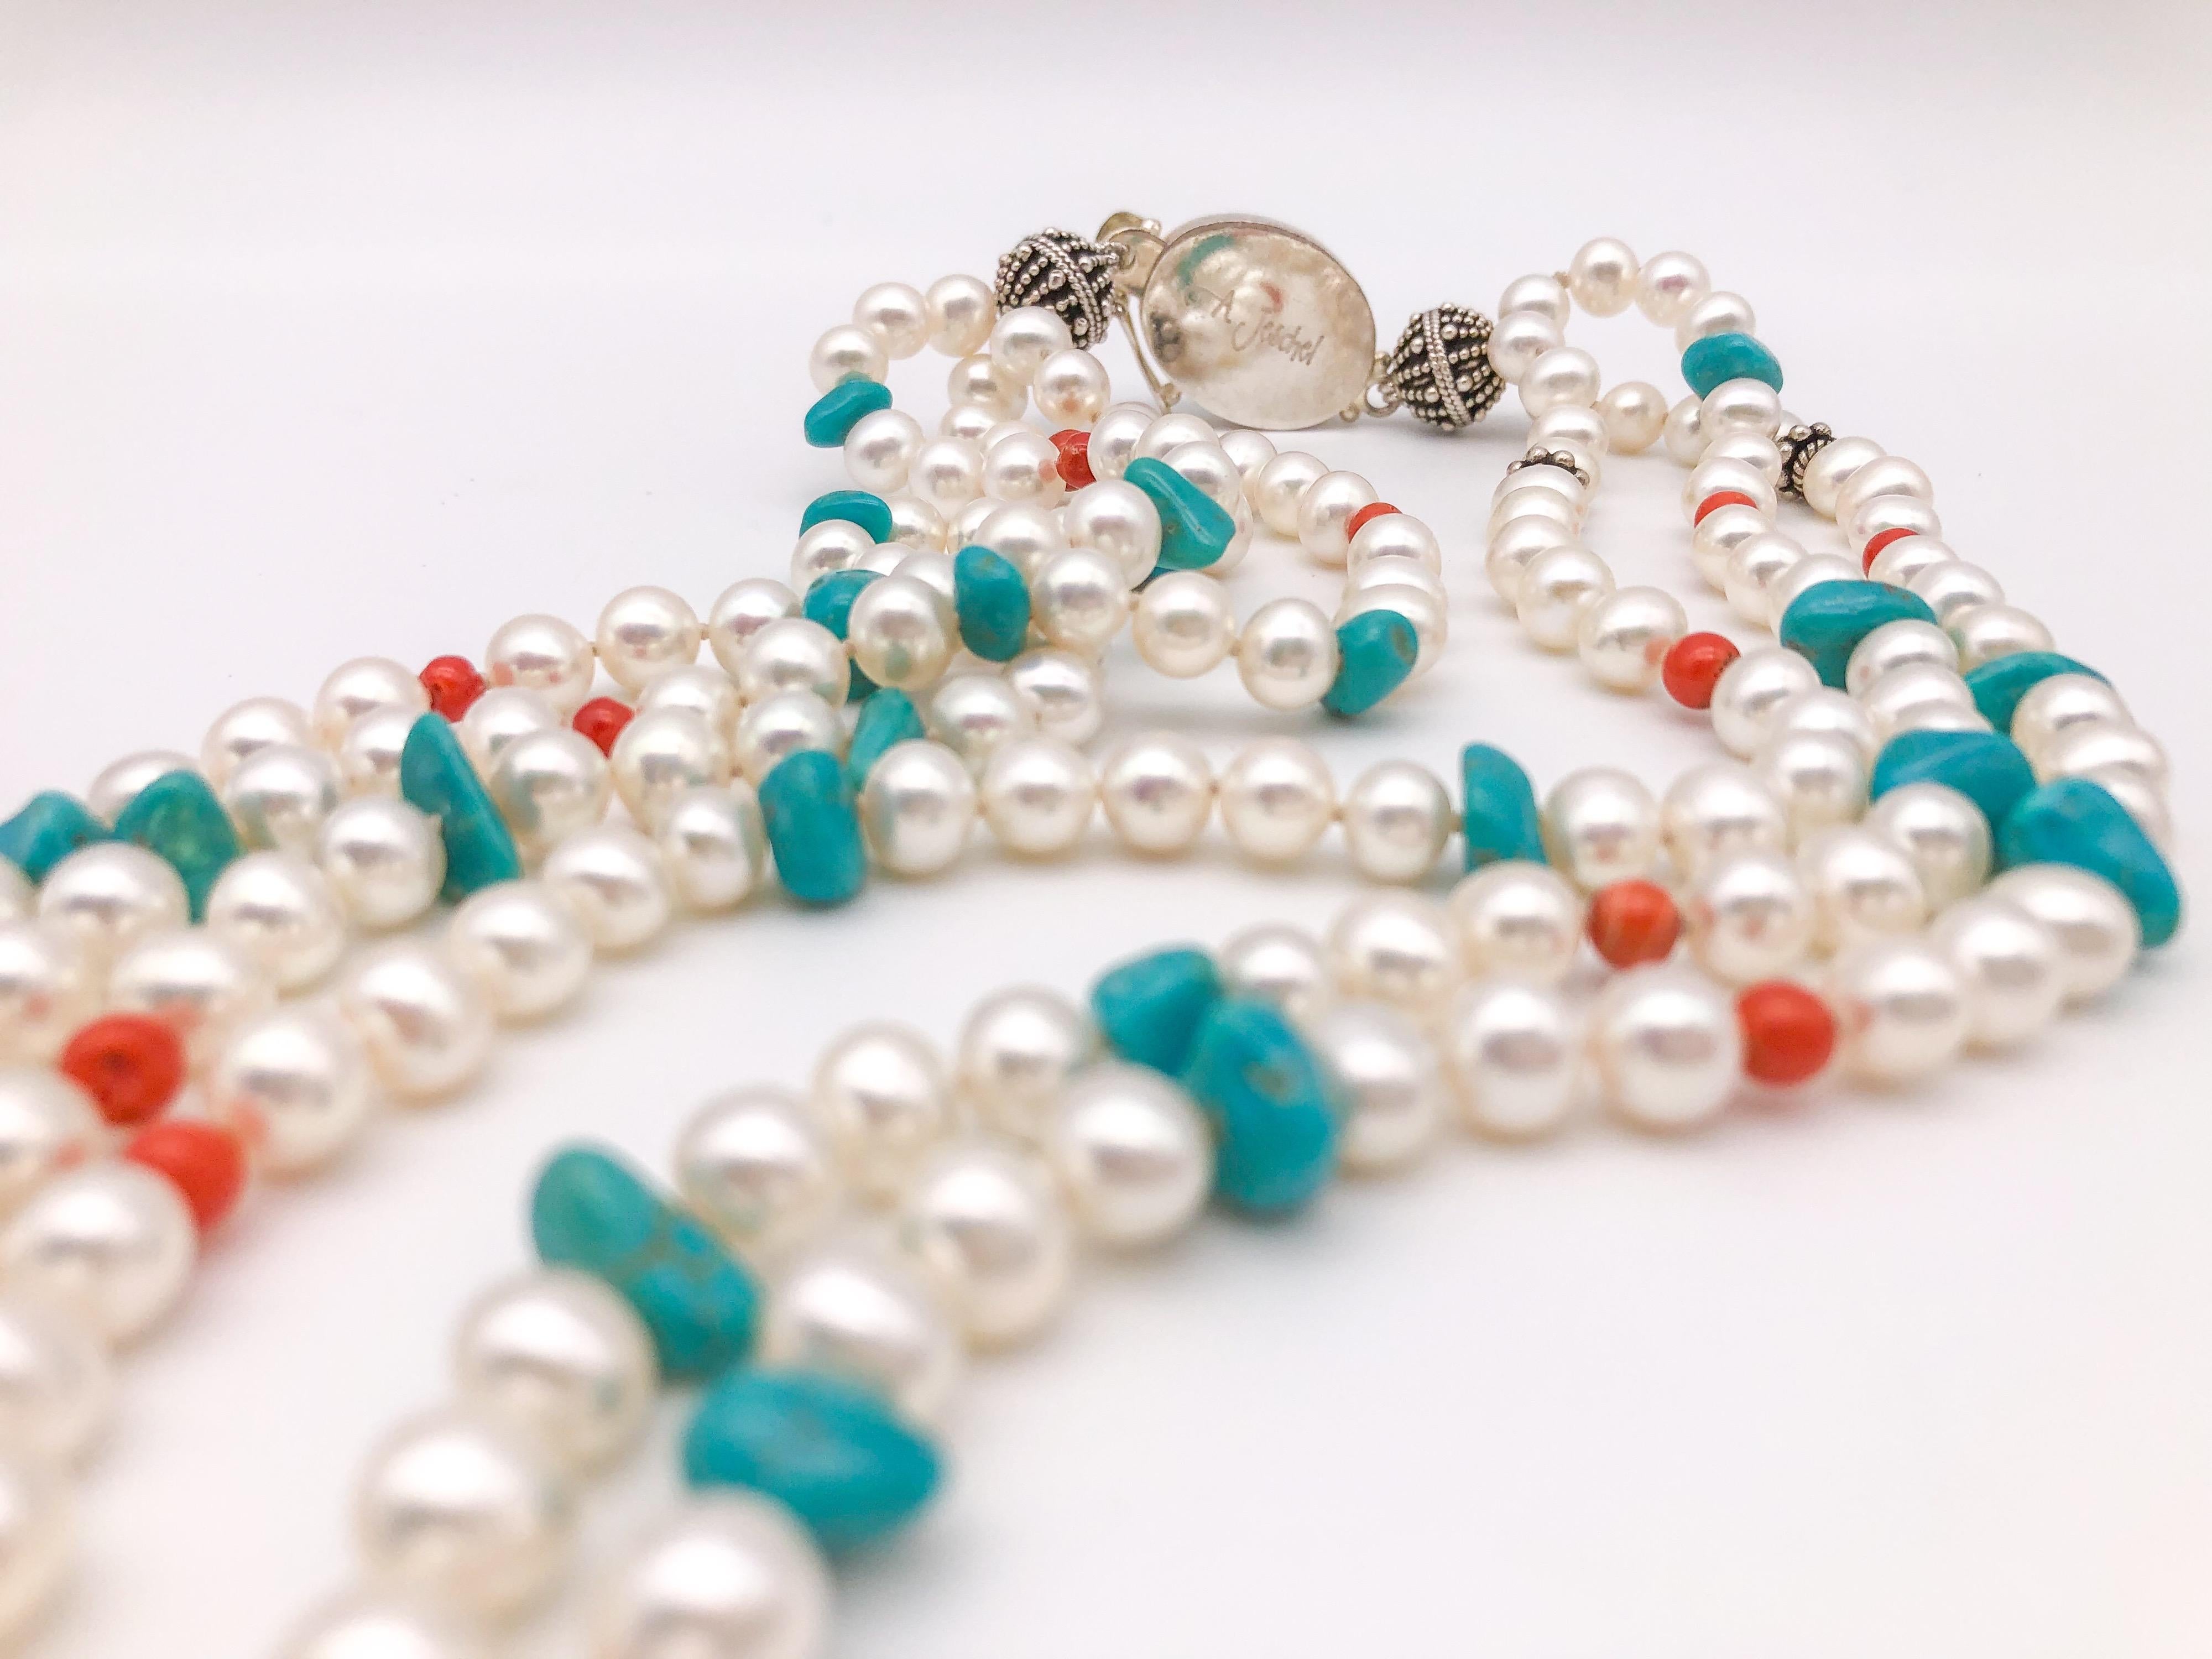 A.Jeschel Freshwater Pearls with Vintage Tibetan Turquoise pendant For Sale 2